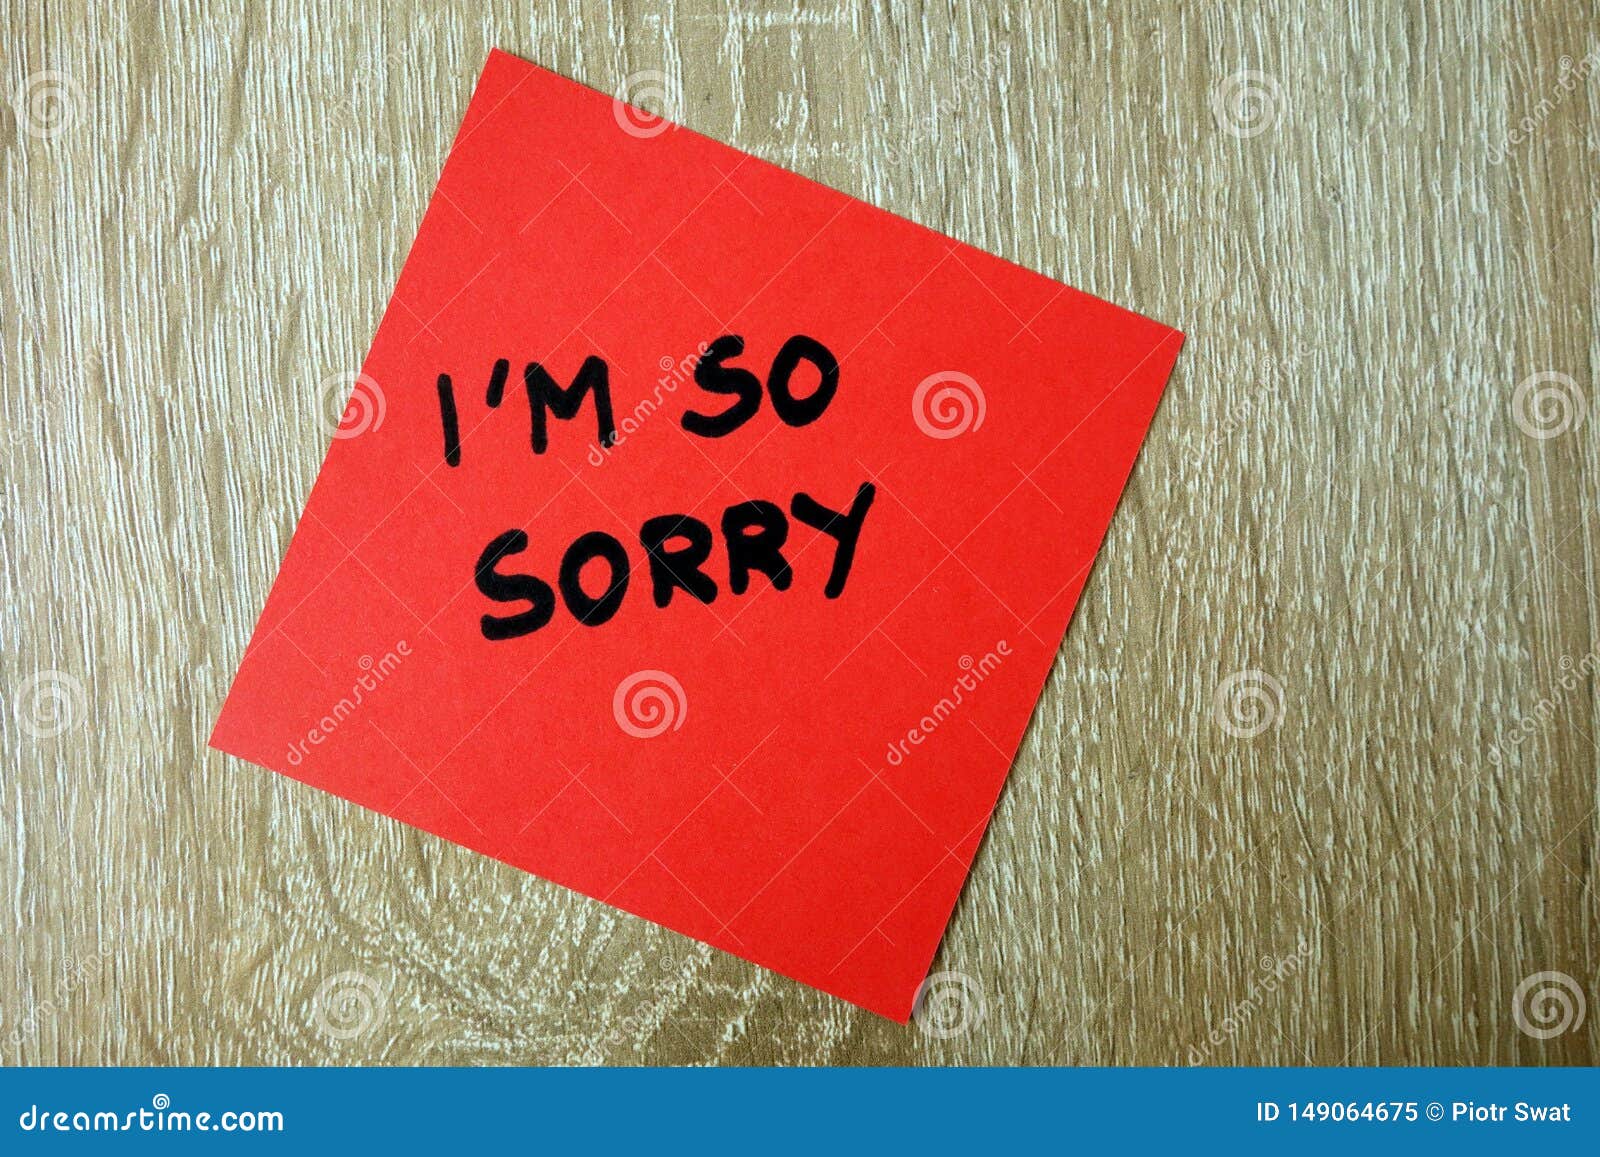 Text I am so Sorry Written on Red Sticker Stock Image - Image of ...